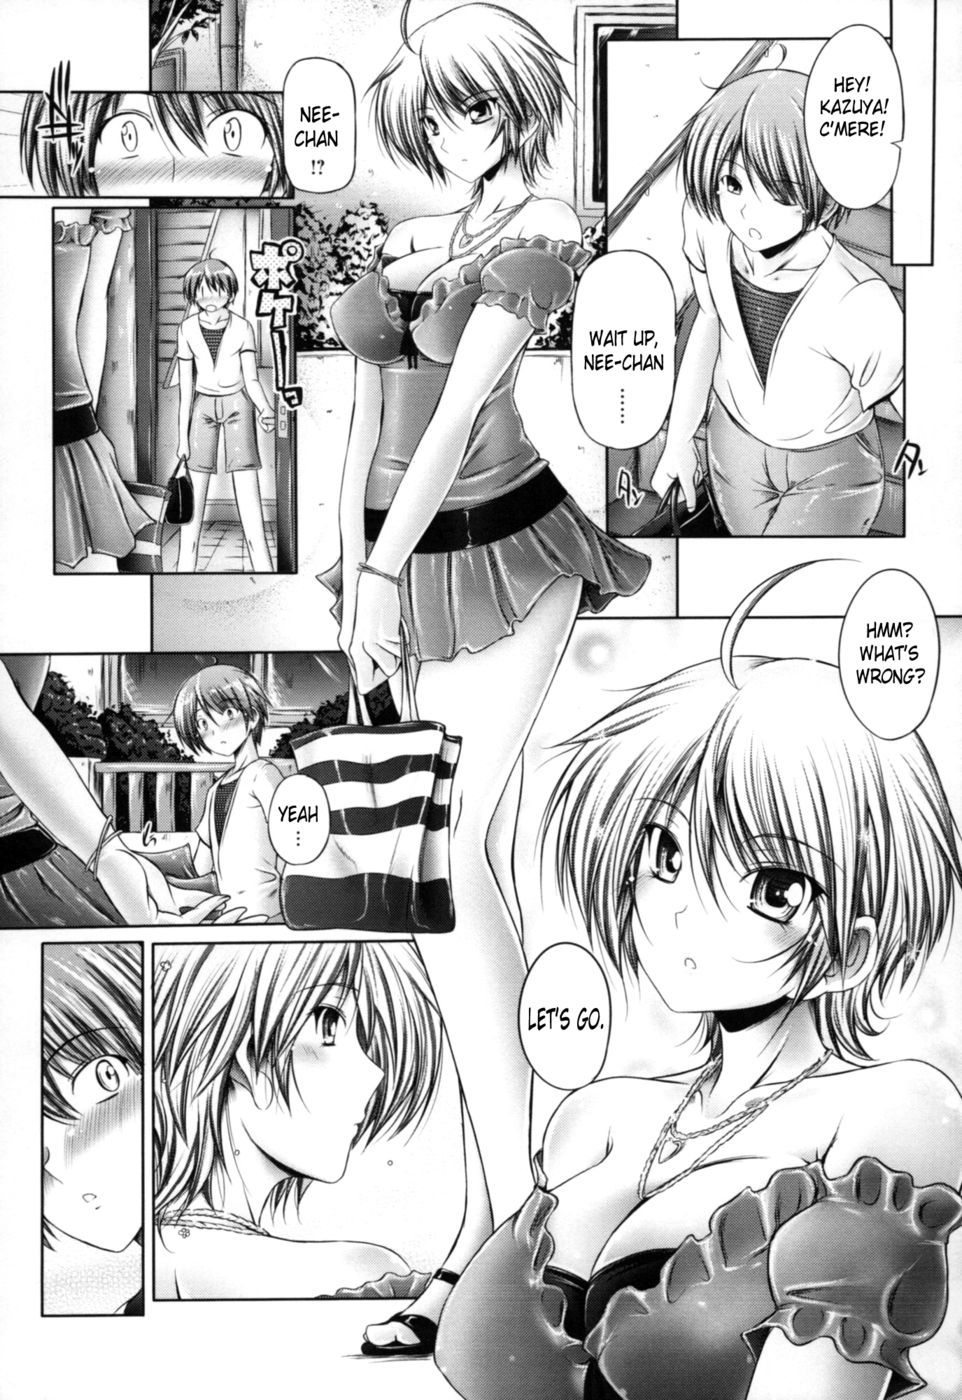 Hentai Cute Line Up - My Big Sister Can't Be This Cute-Read-Hentai Manga Hentai Comic - Page: 3 -  Online porn video at mobile